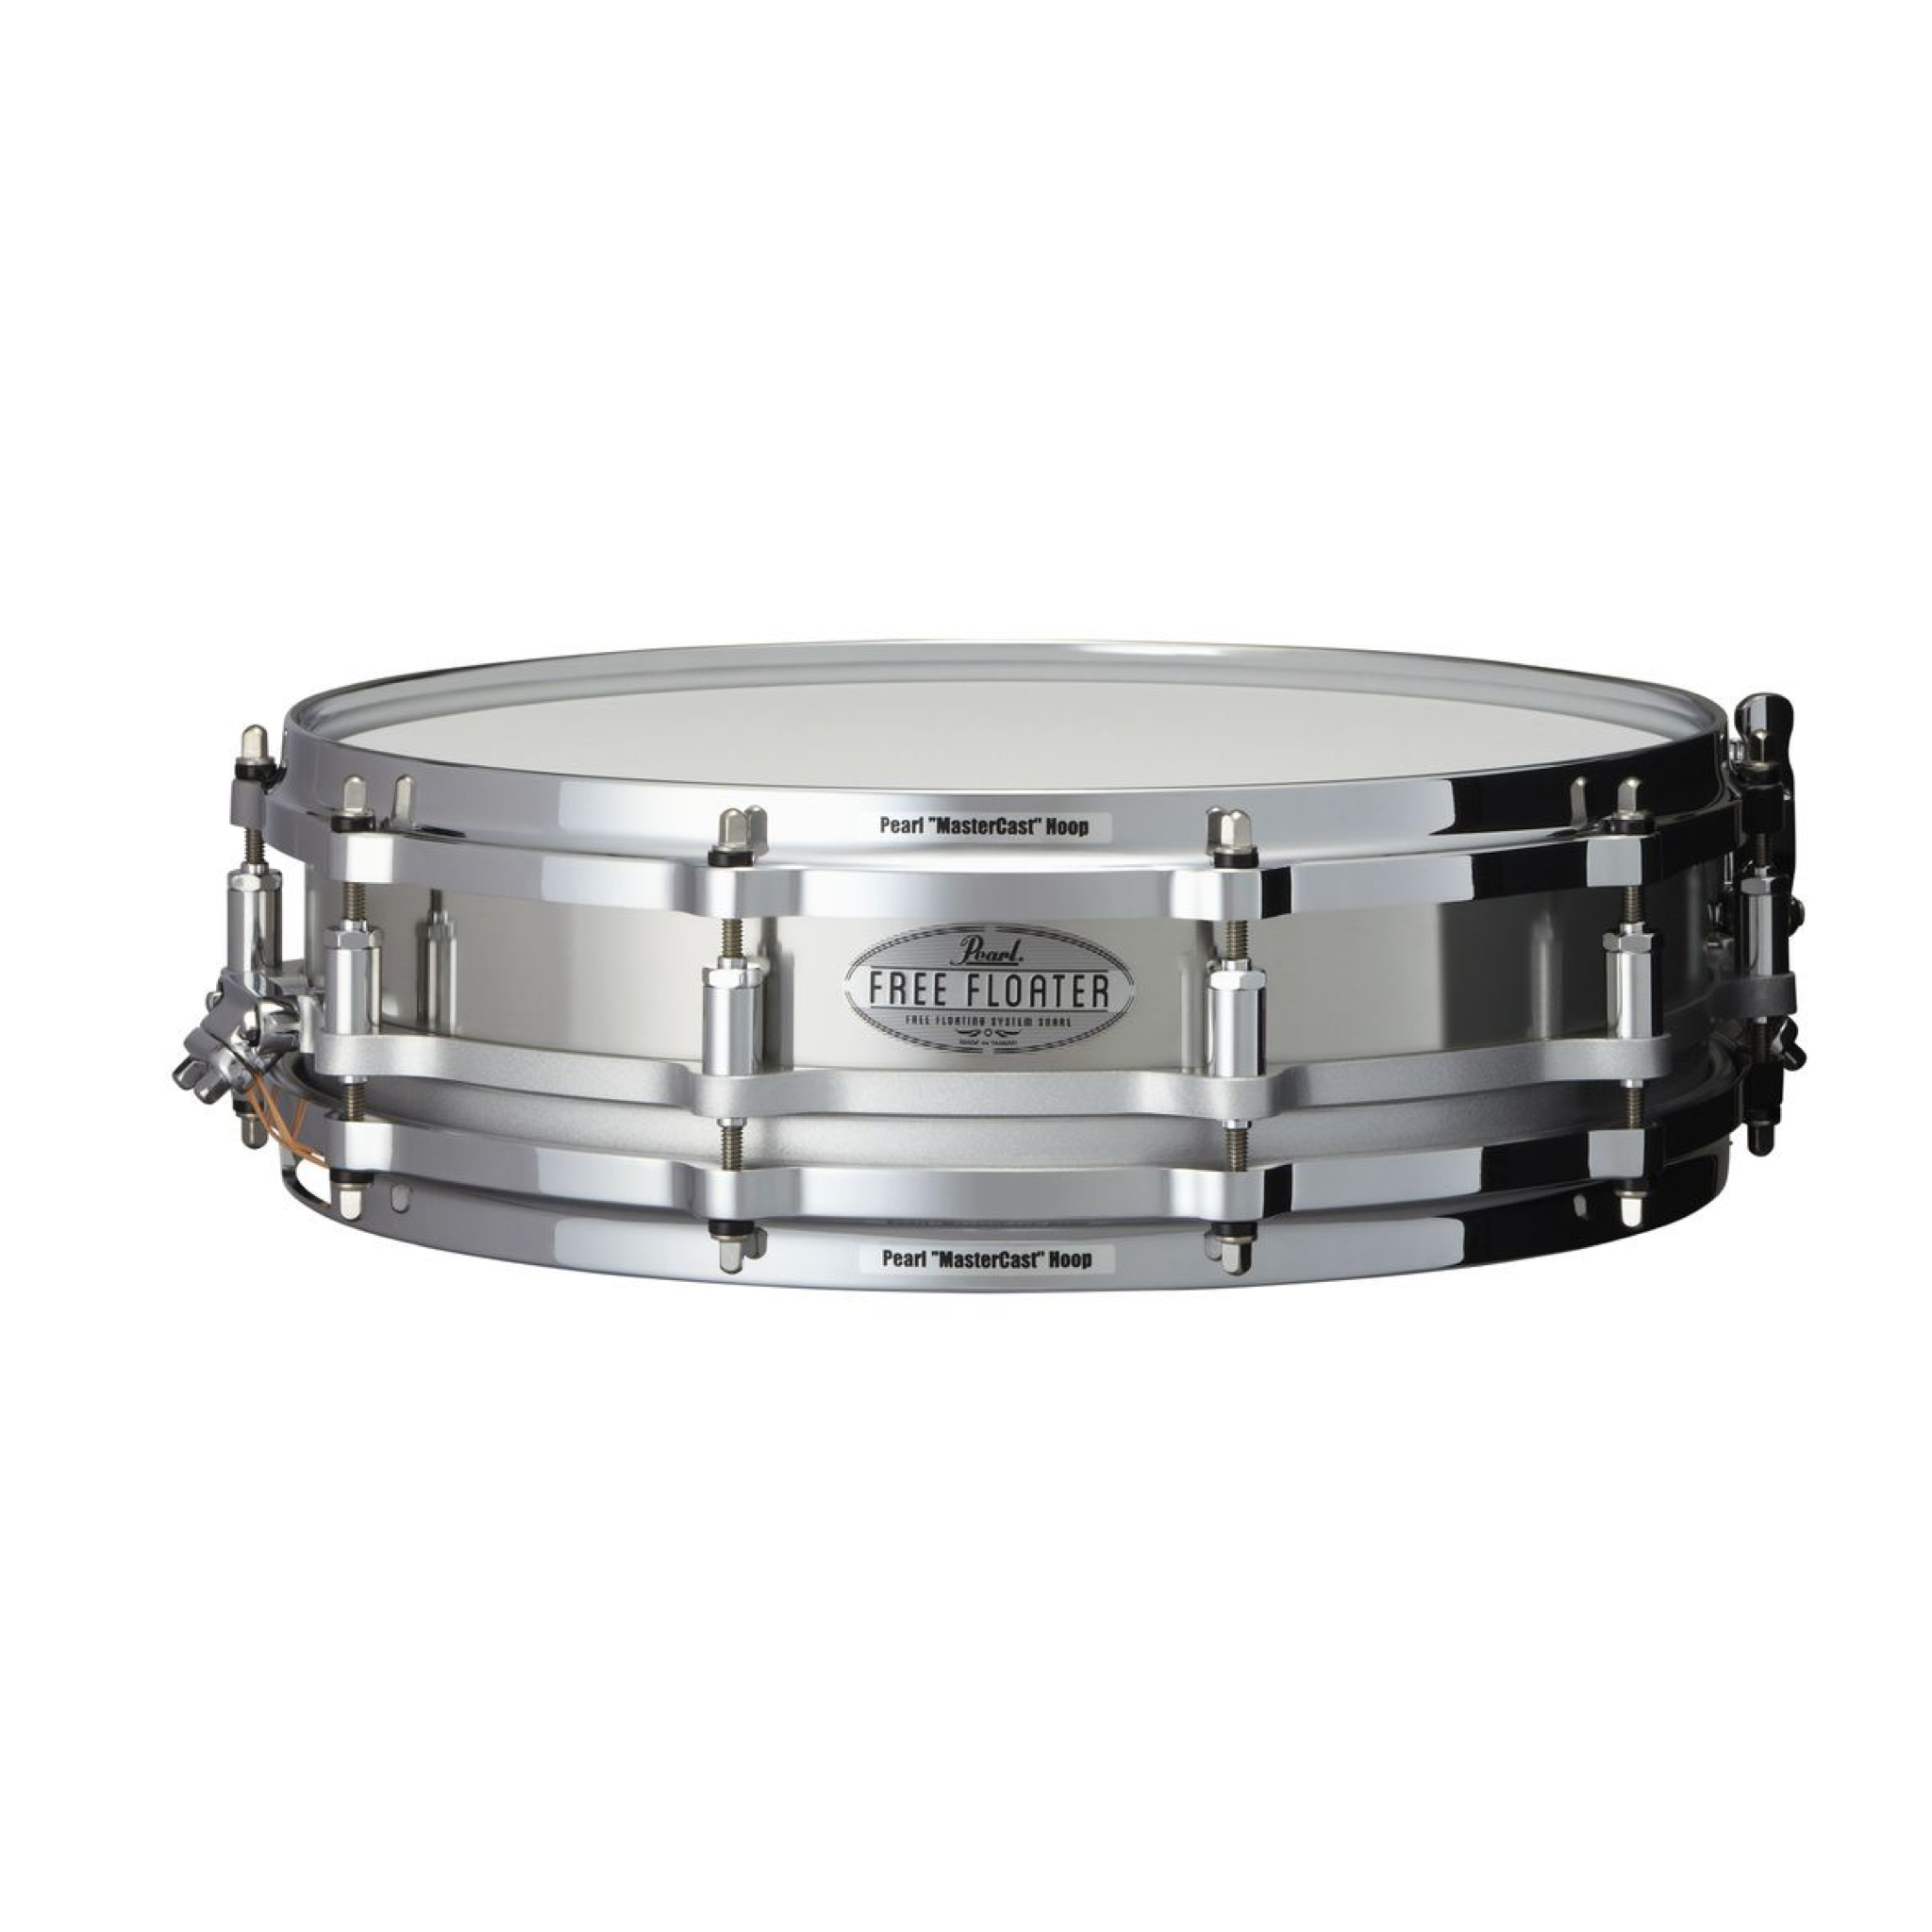 Pearl Free Floating Piccolo Snare Drum, Maple Shell, 14 x 3.5